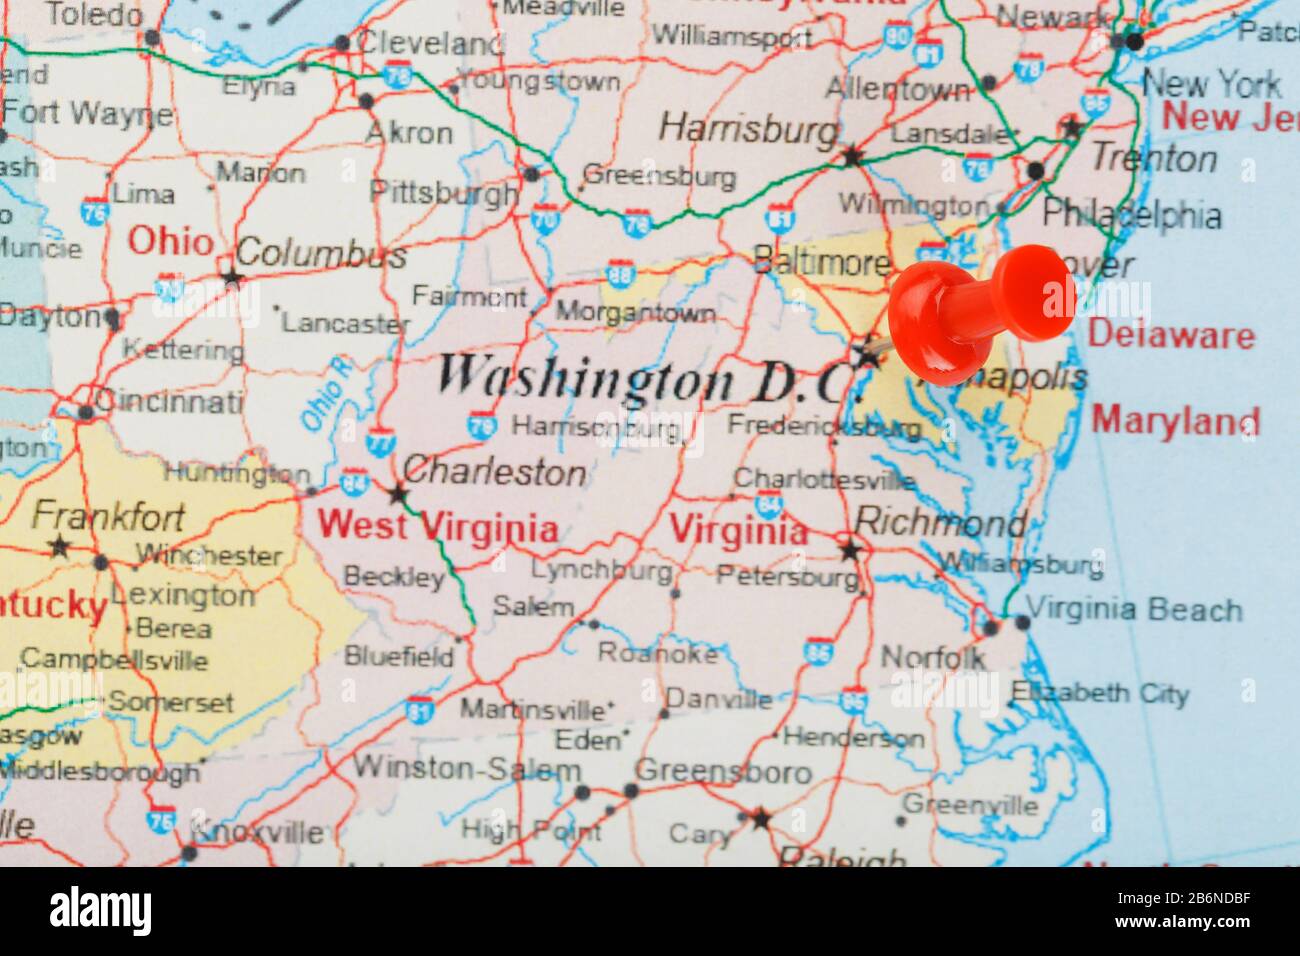 washington dc on map Red Clerical Needle On The Map Of Usa South Washington Dc And The Capital Of Richmond Close Up Map Of Dc With Red Tack Map Of United States Usa Stock Photo